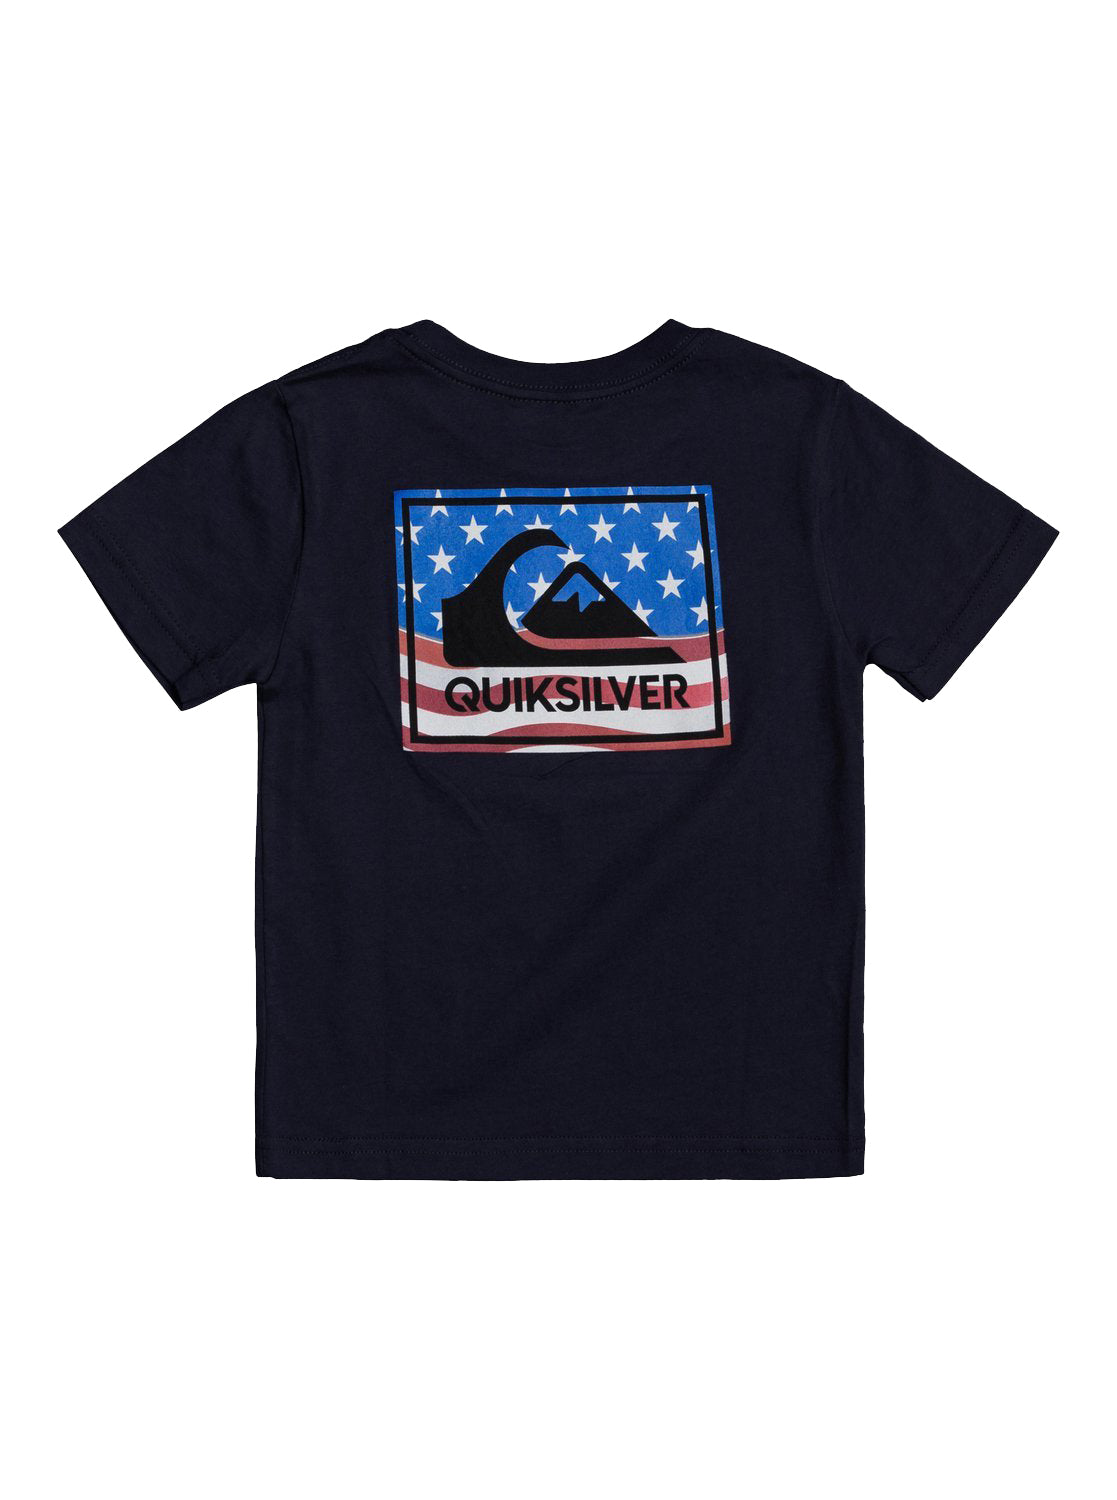 Quiksilver Architexure Youth Tee BYJ0 7